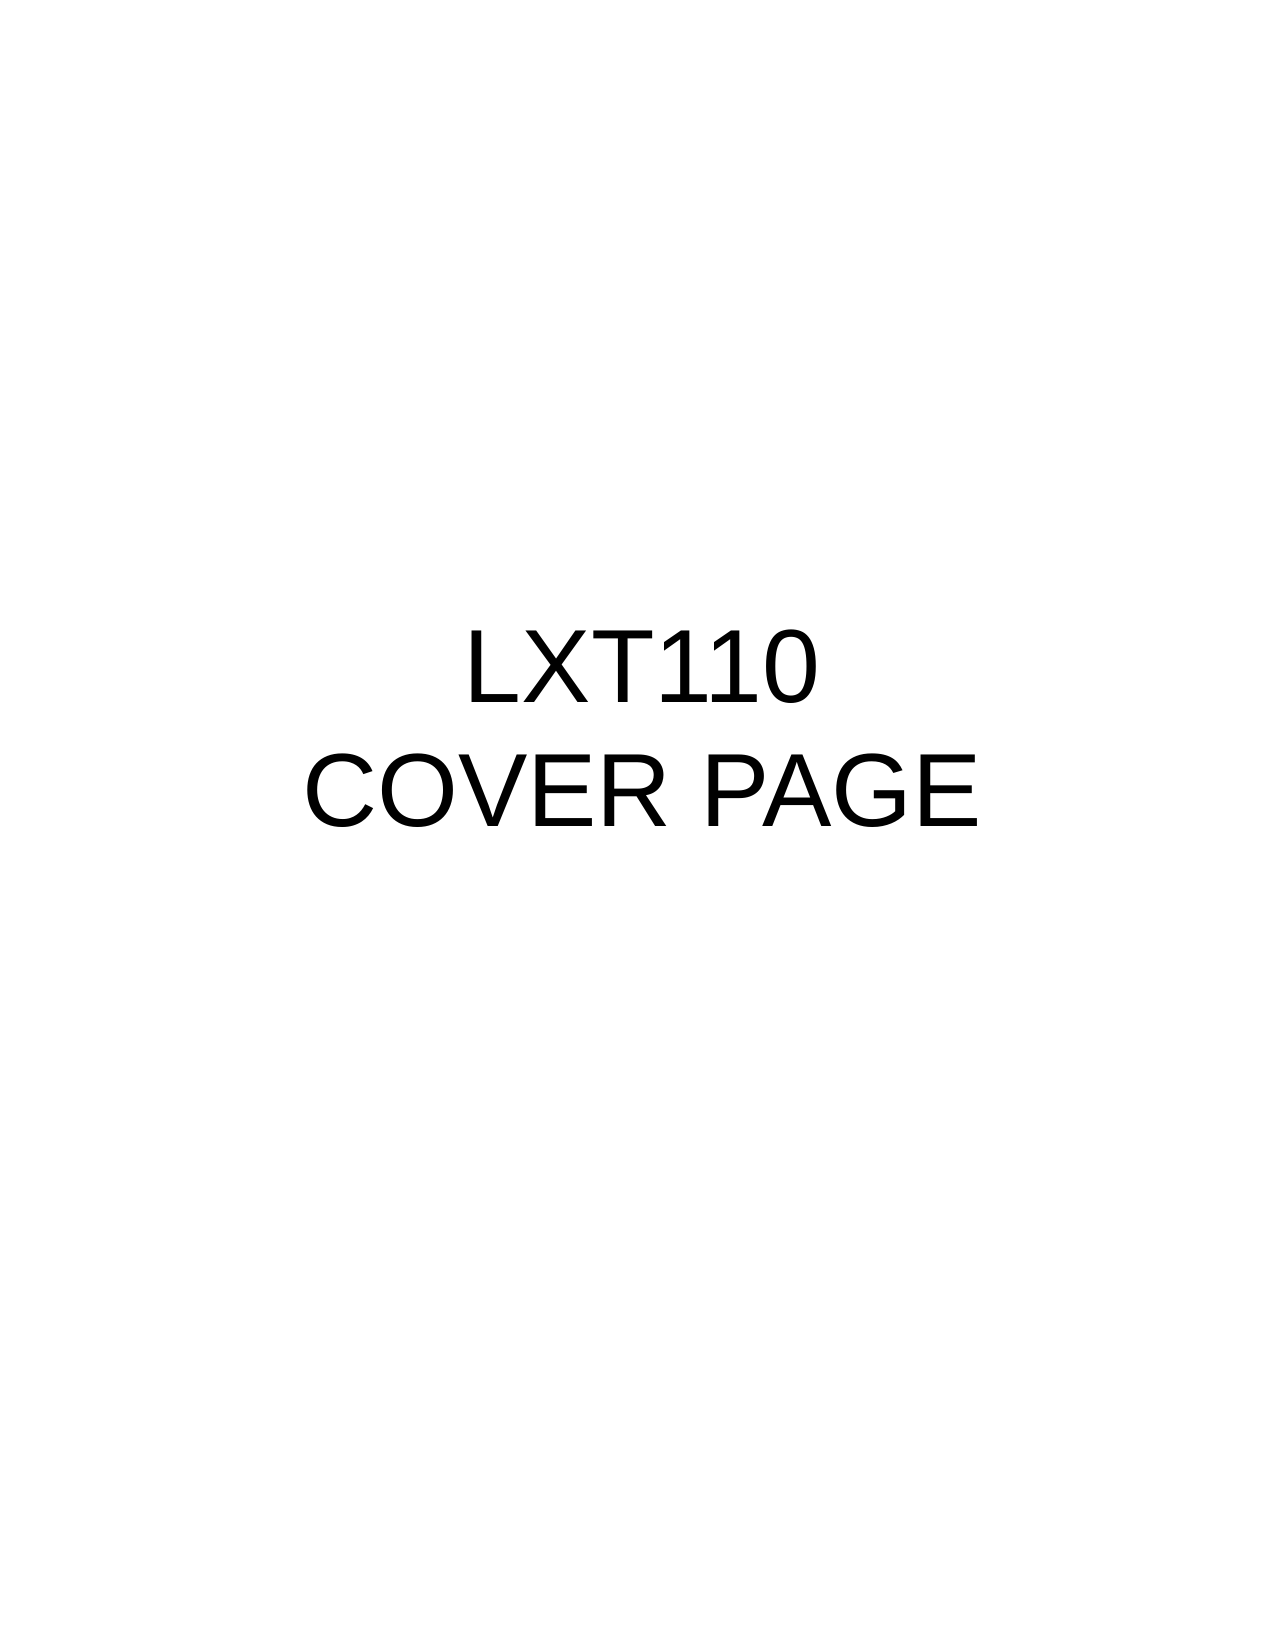 LXT110COVER PAGE